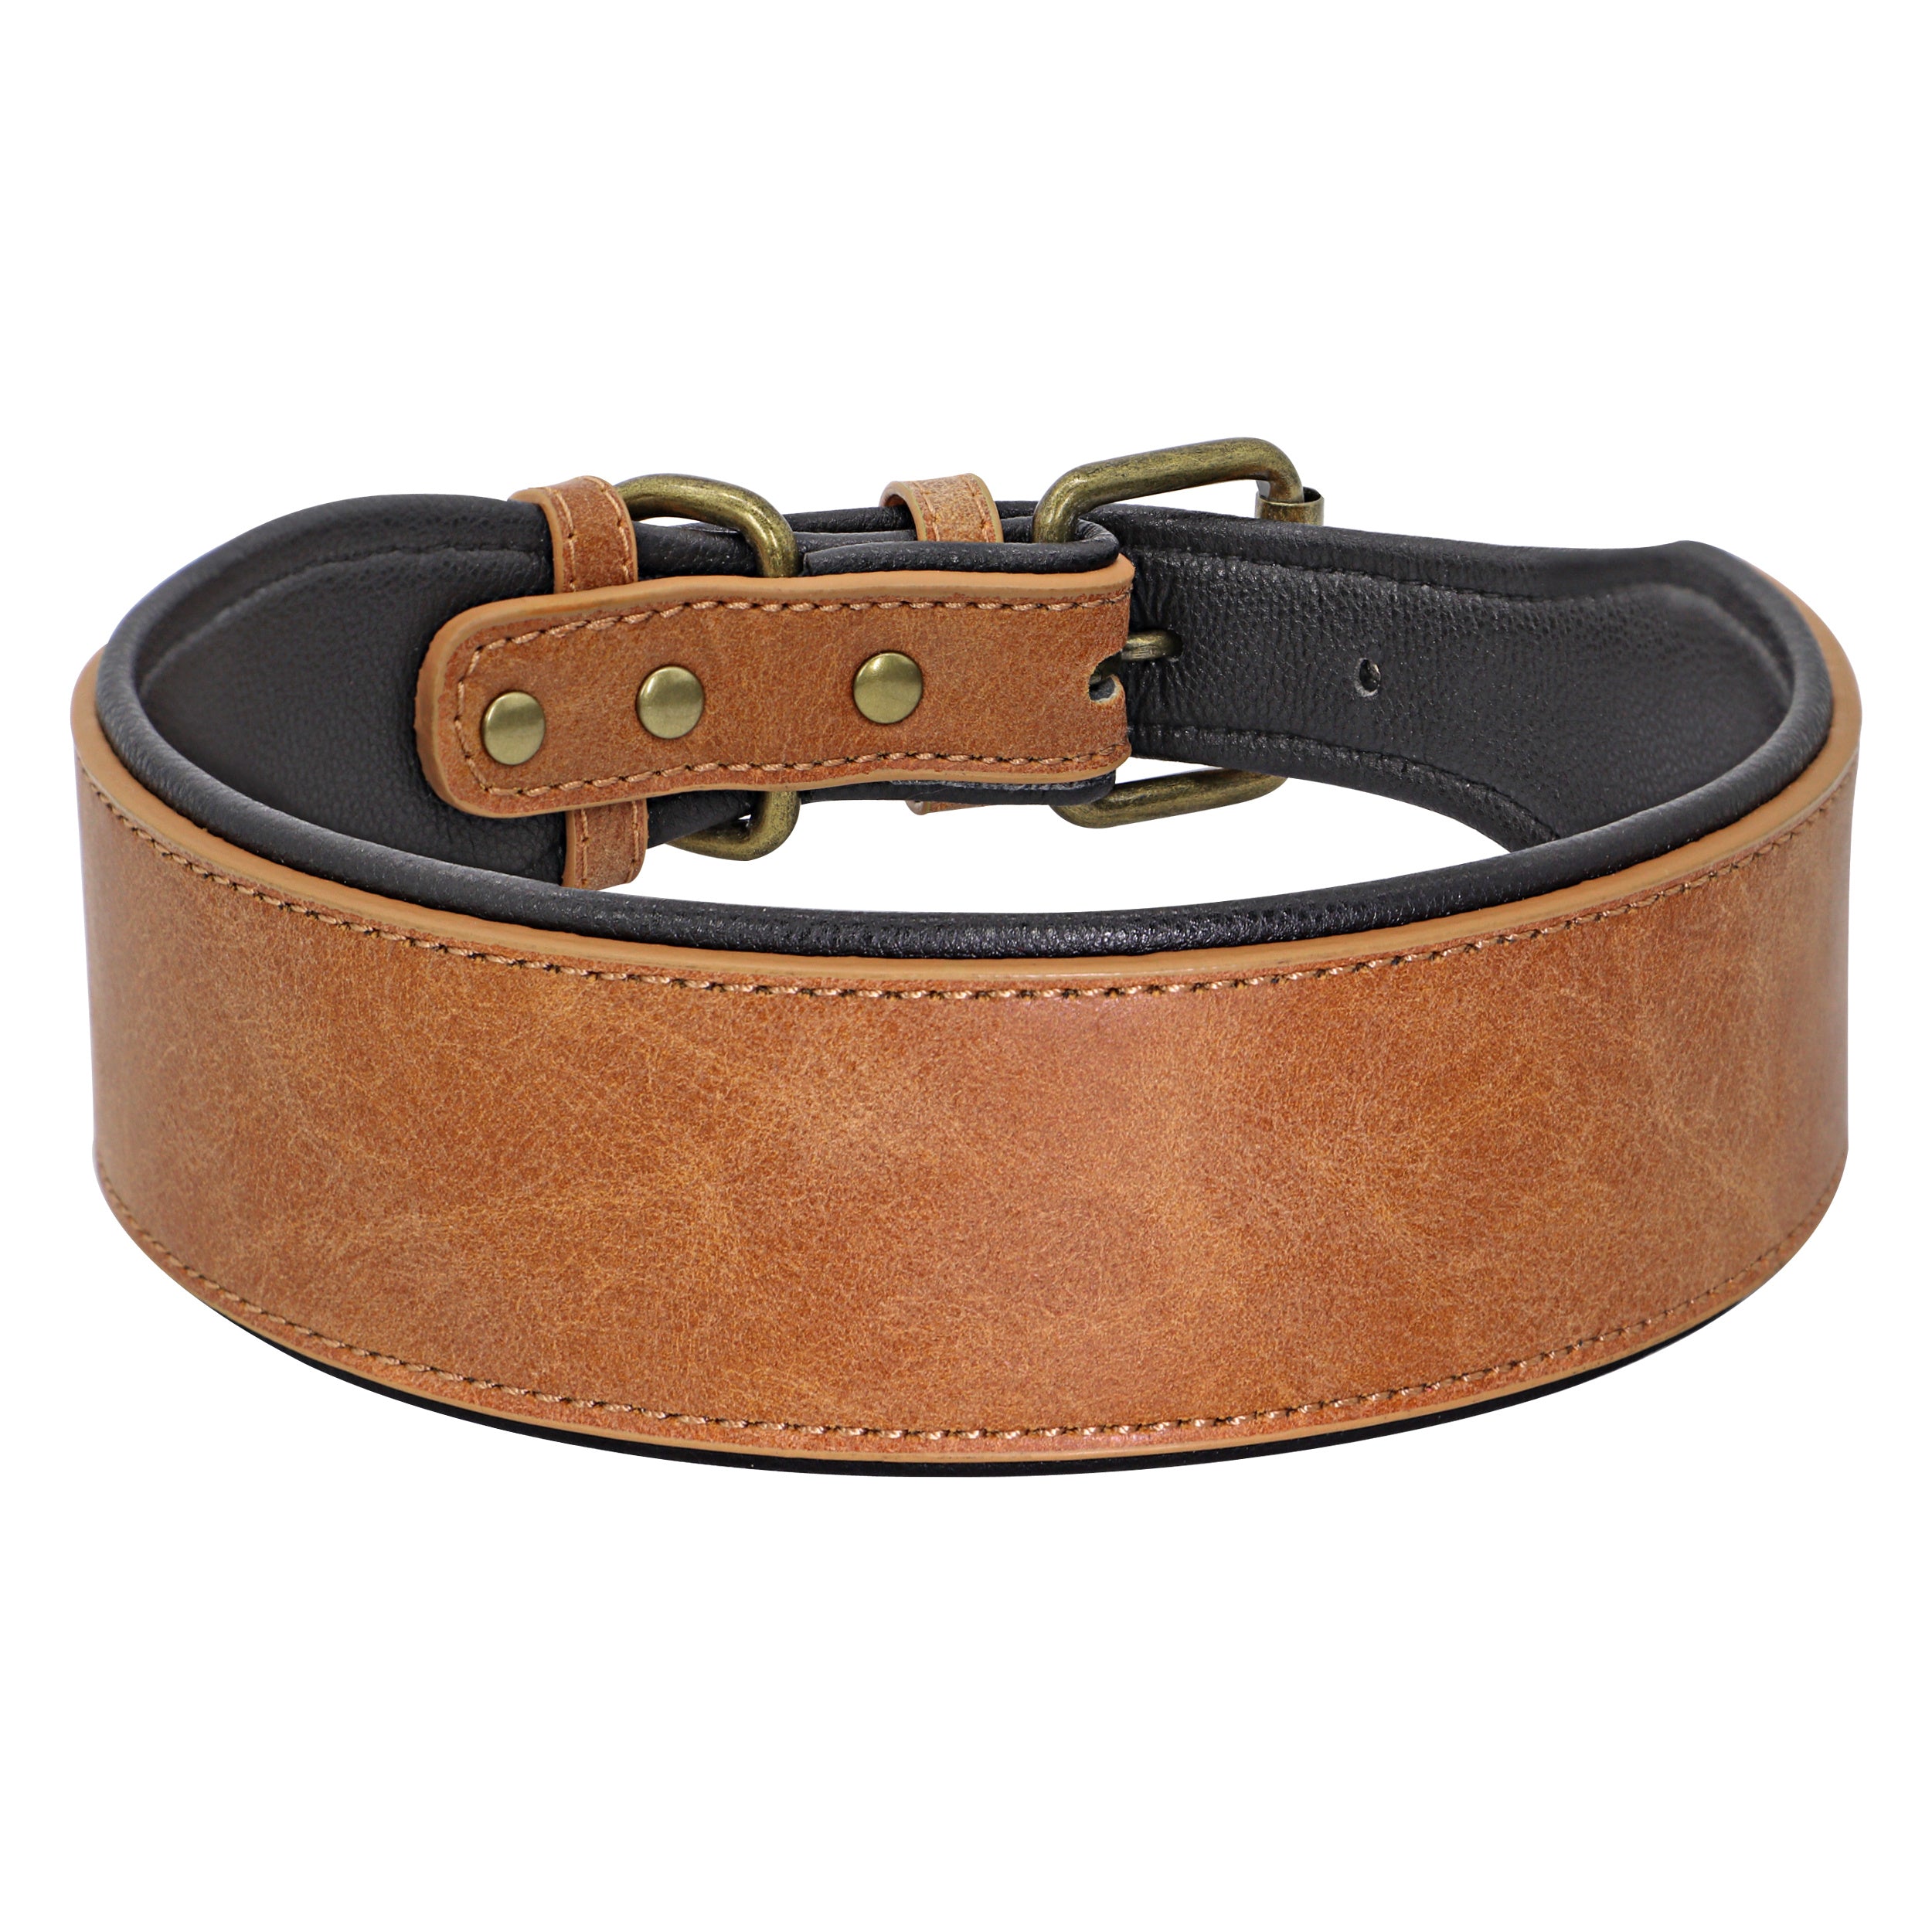 Wide Leather Dog Collar Large Soft Padded Pet Dog Collar For Medium Large Dogs